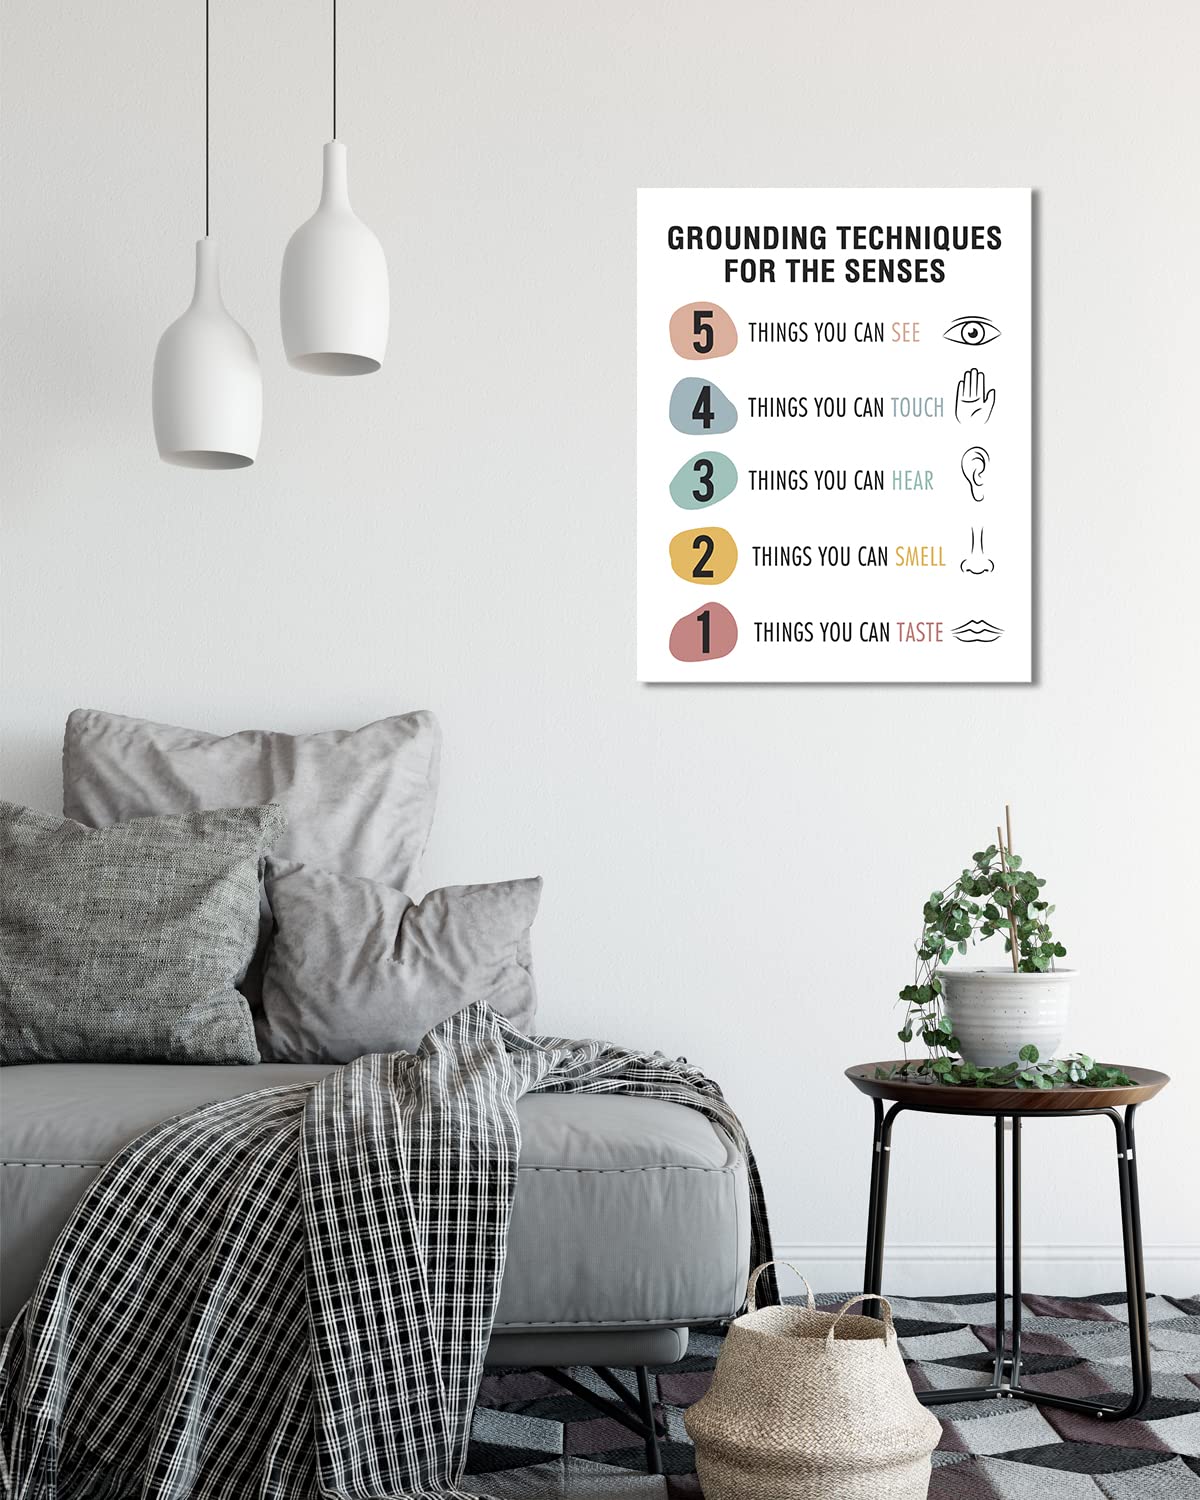 Grounding Techniques for the Senses - Wall Decor for Therapy Office - Mindfulness Wall Decor - Counseling Office - Mental Health Wall Art - School Psychologist, Therapist